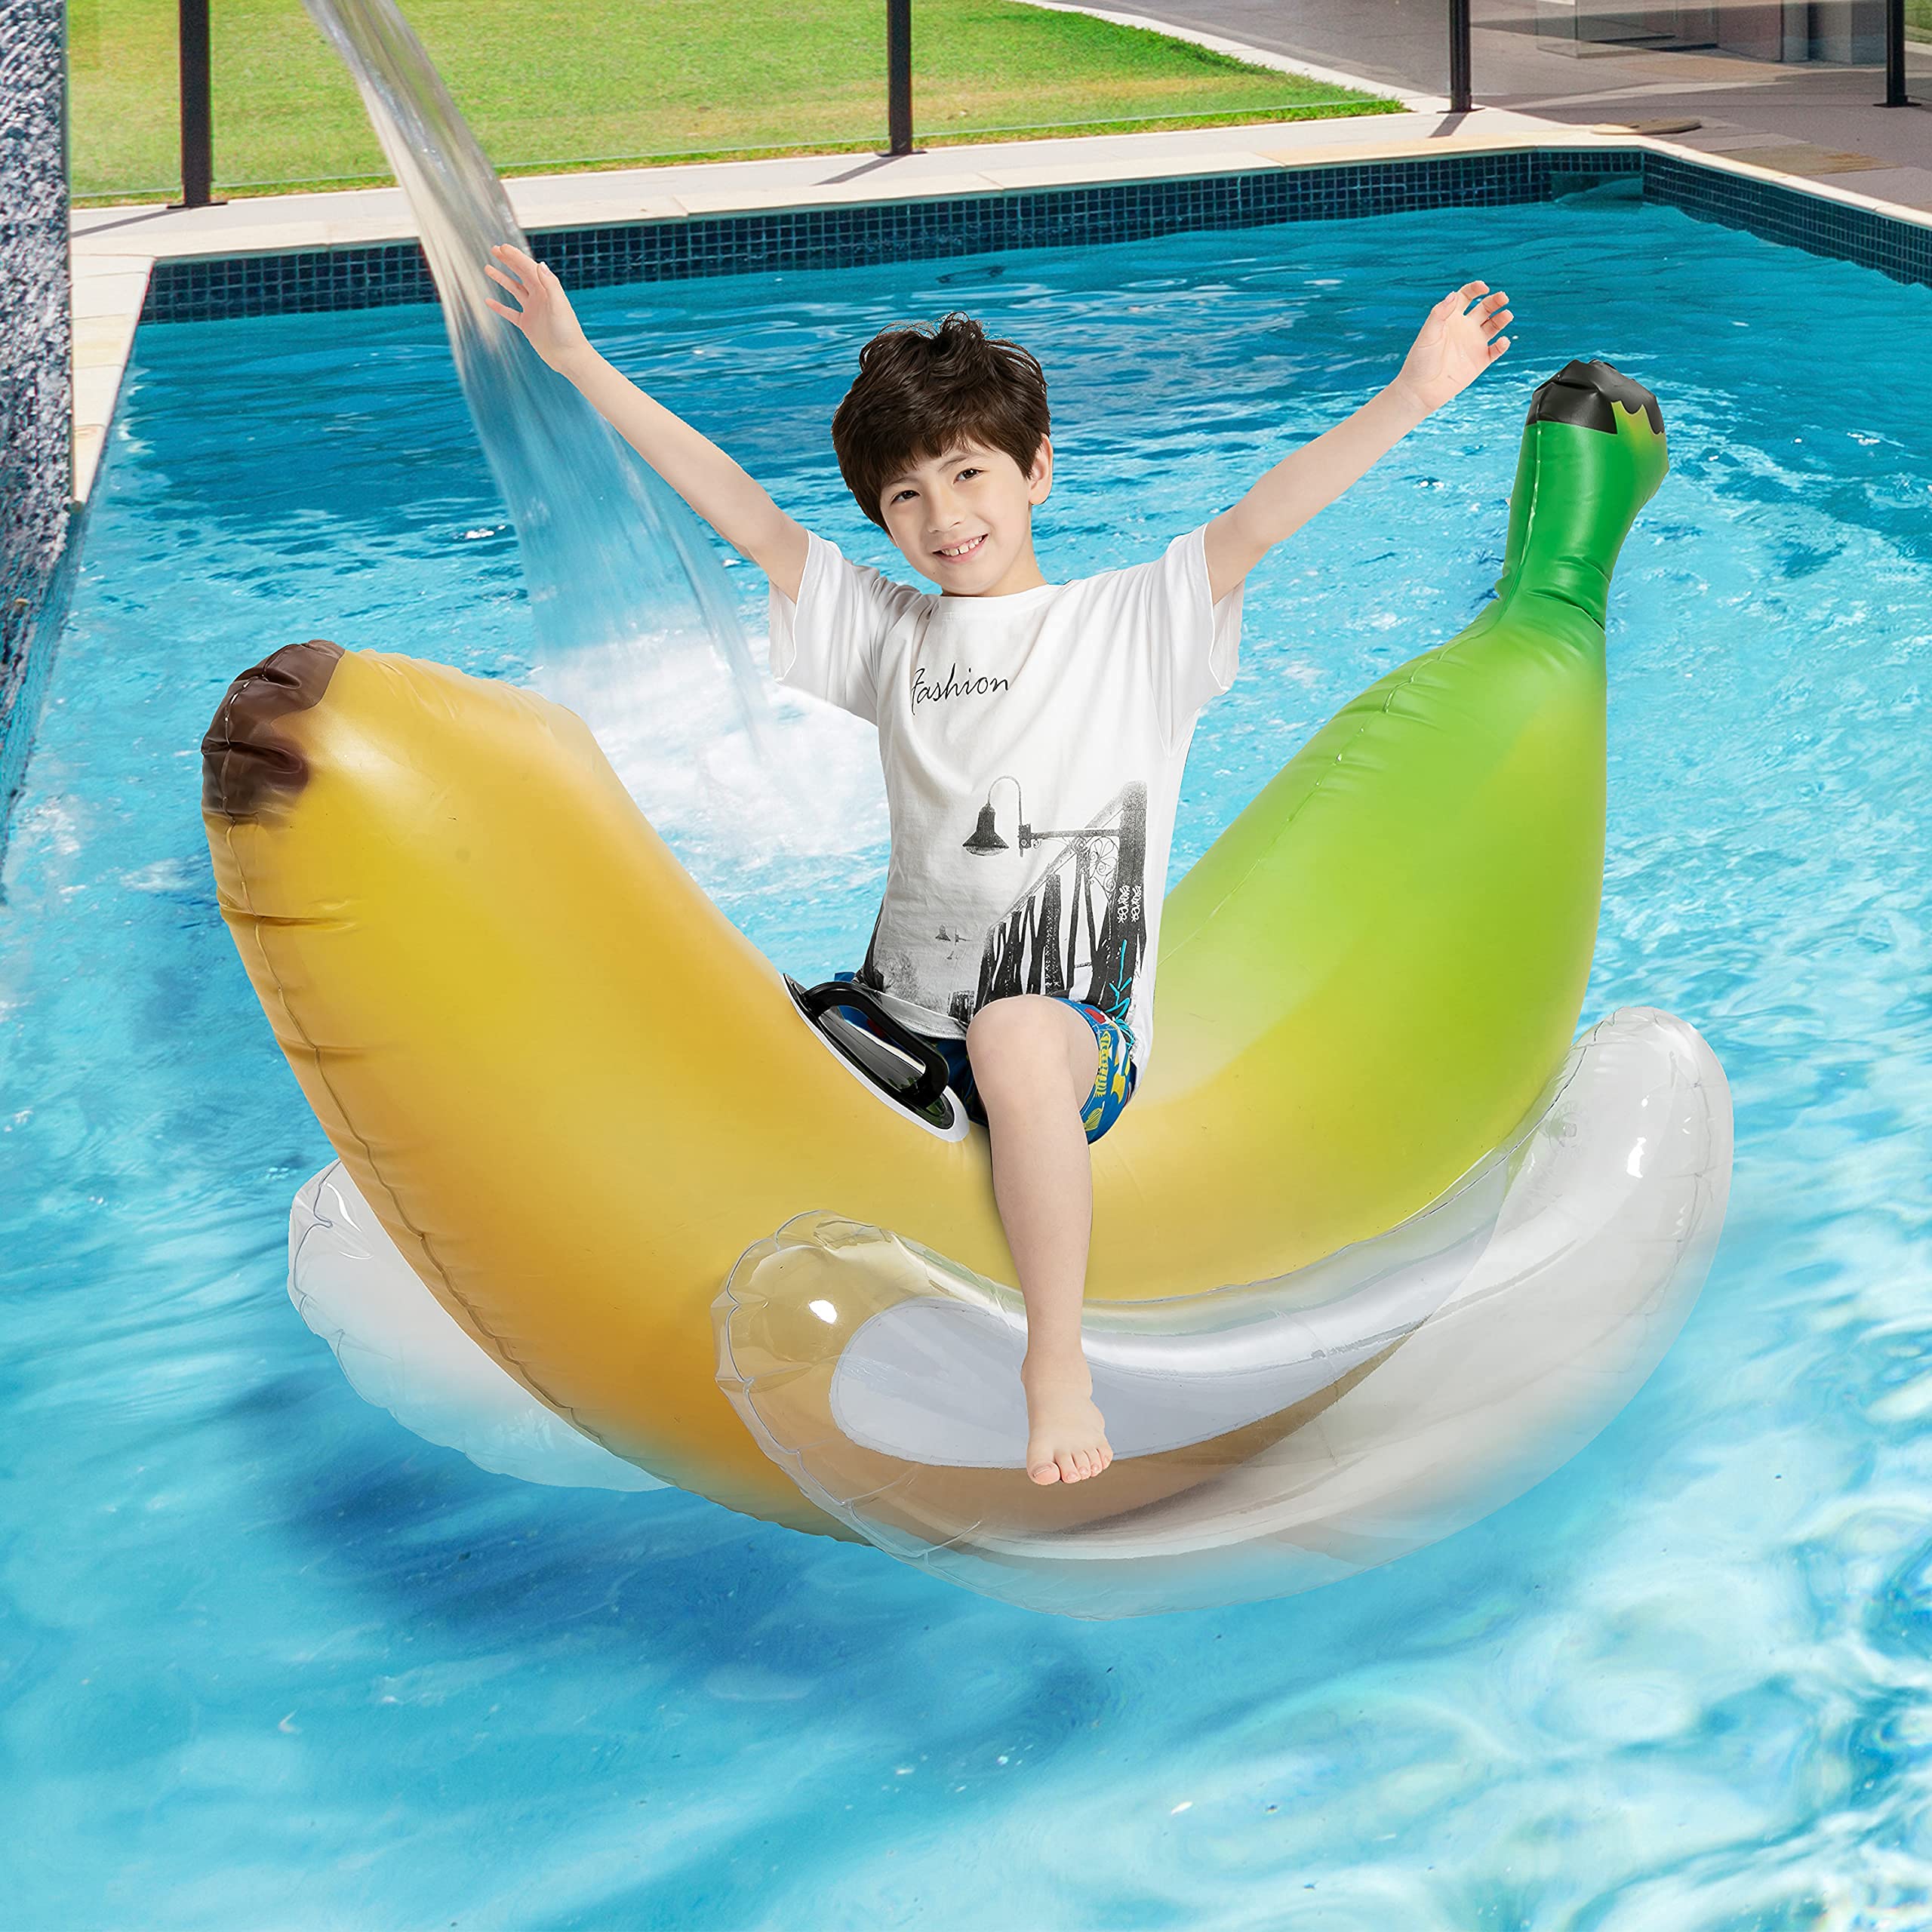 SLOOSH - Inflatable Boat Pool Float with Reinforced Cooler